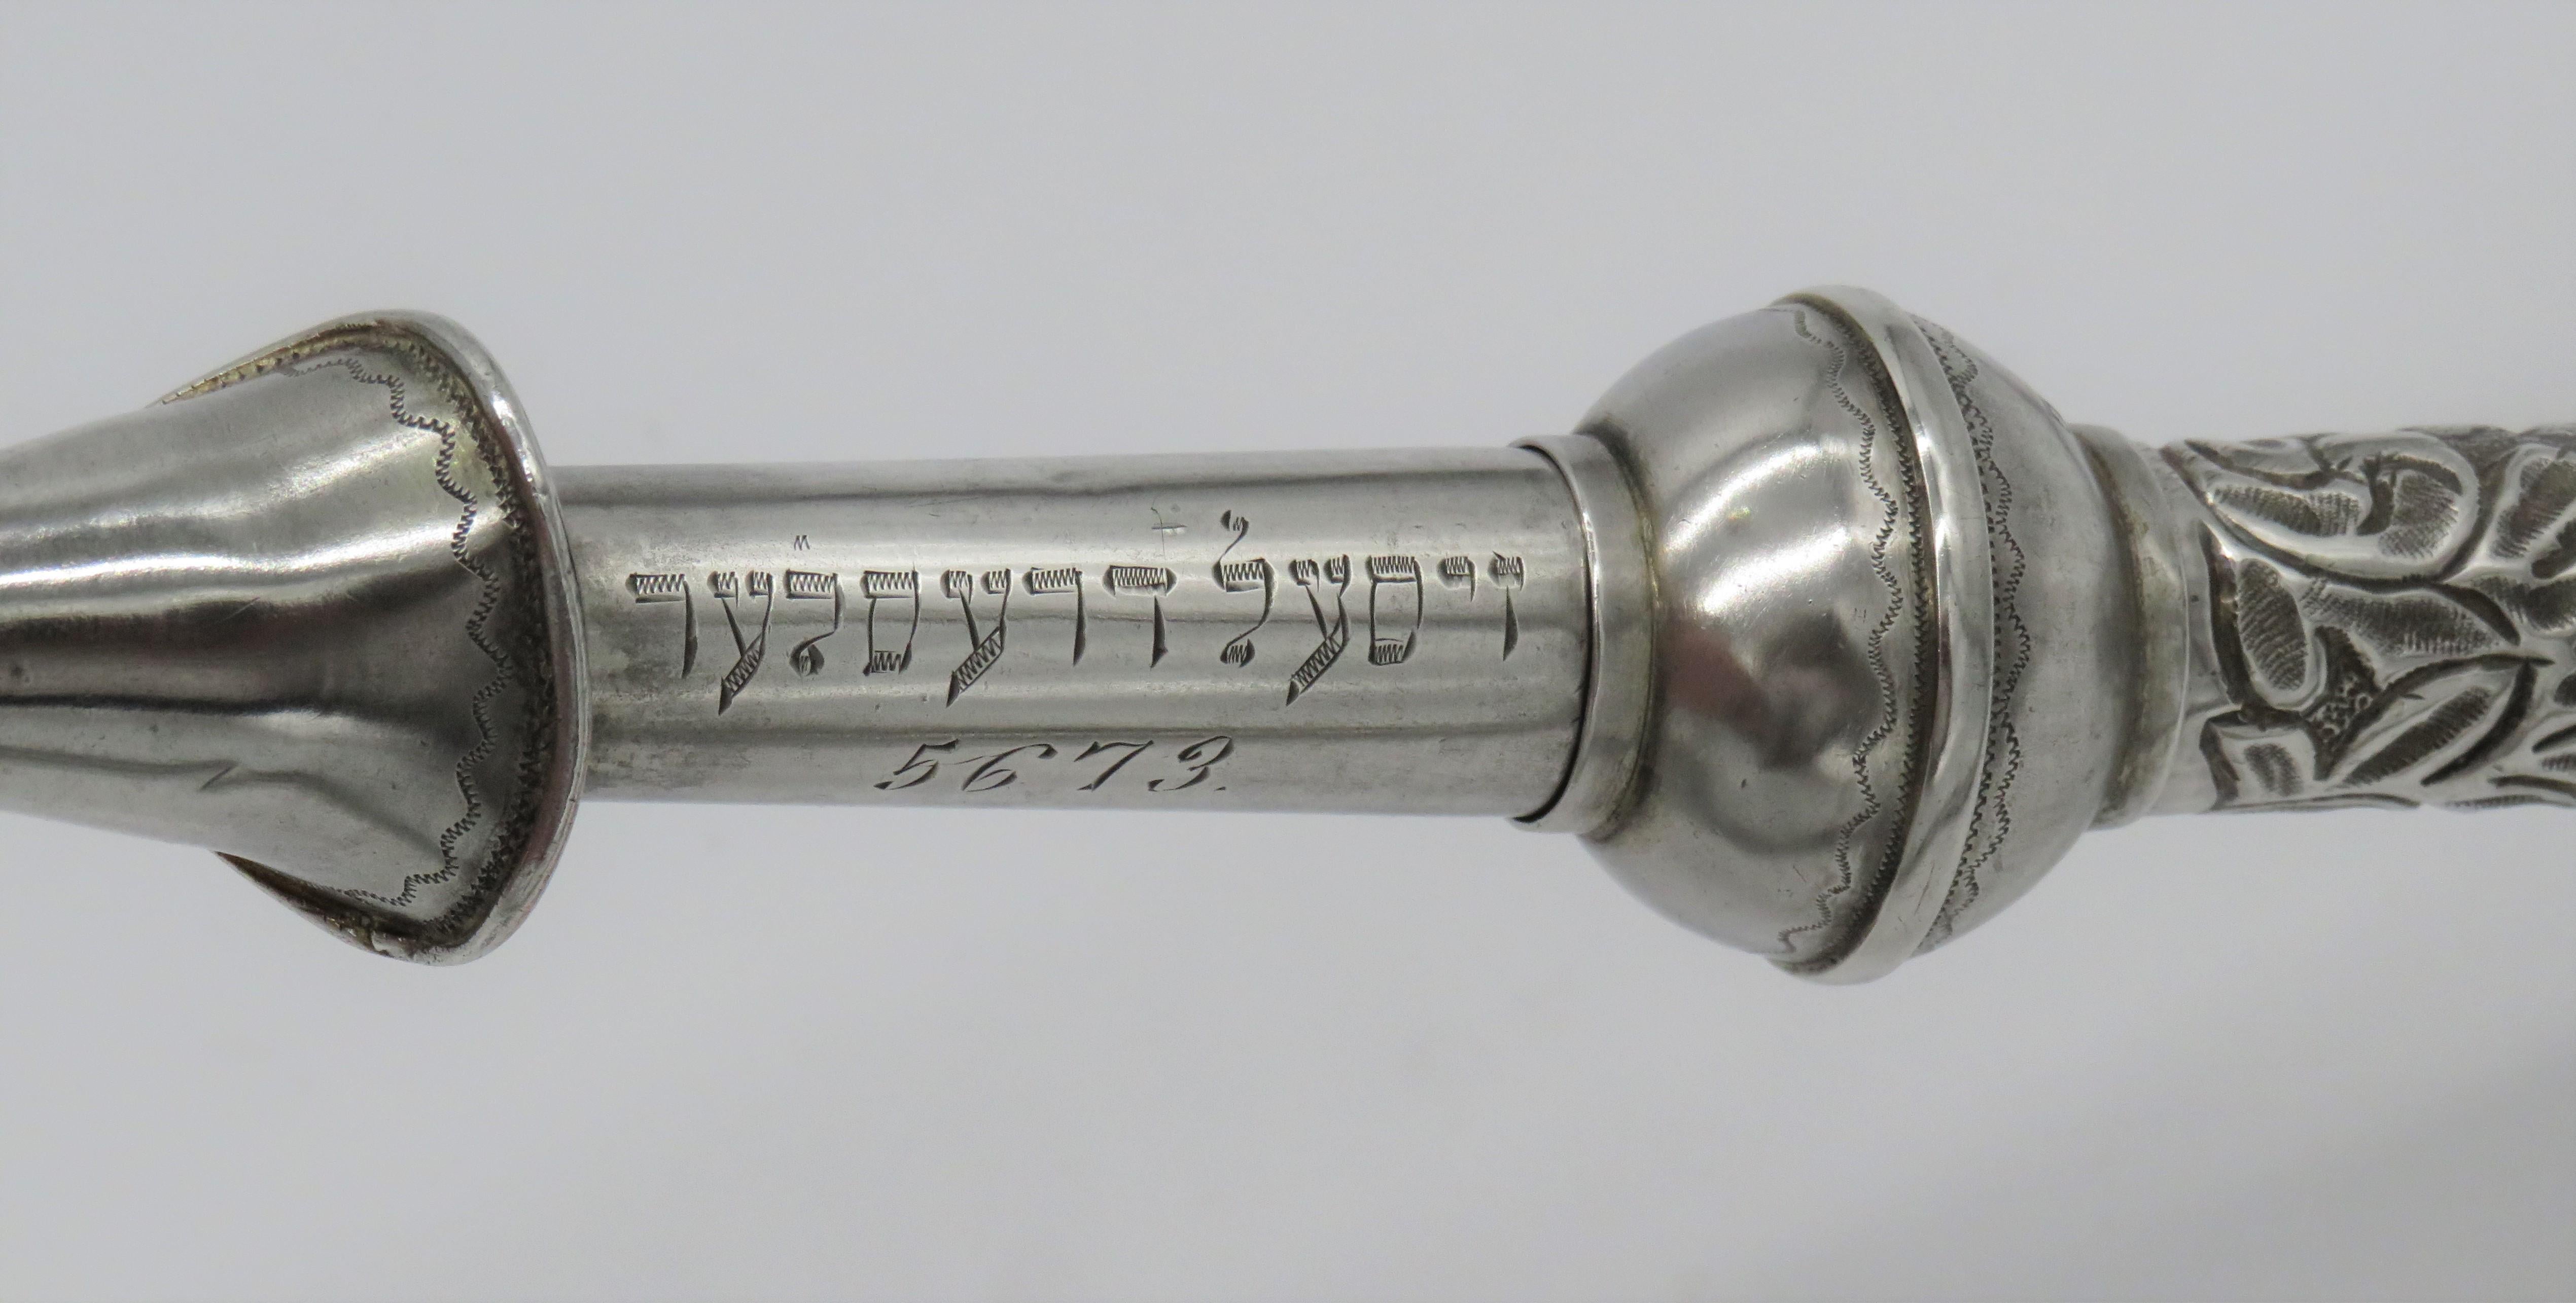 Handmade silver Torah pointer, Russian Empire, circa 1896.
The handle is made with a knob shape interval engraved with floral ornaments.
The Hebrew name Zisel Dresler with the Jewish year 5673 is engraved on the lower part of the pointer.
The